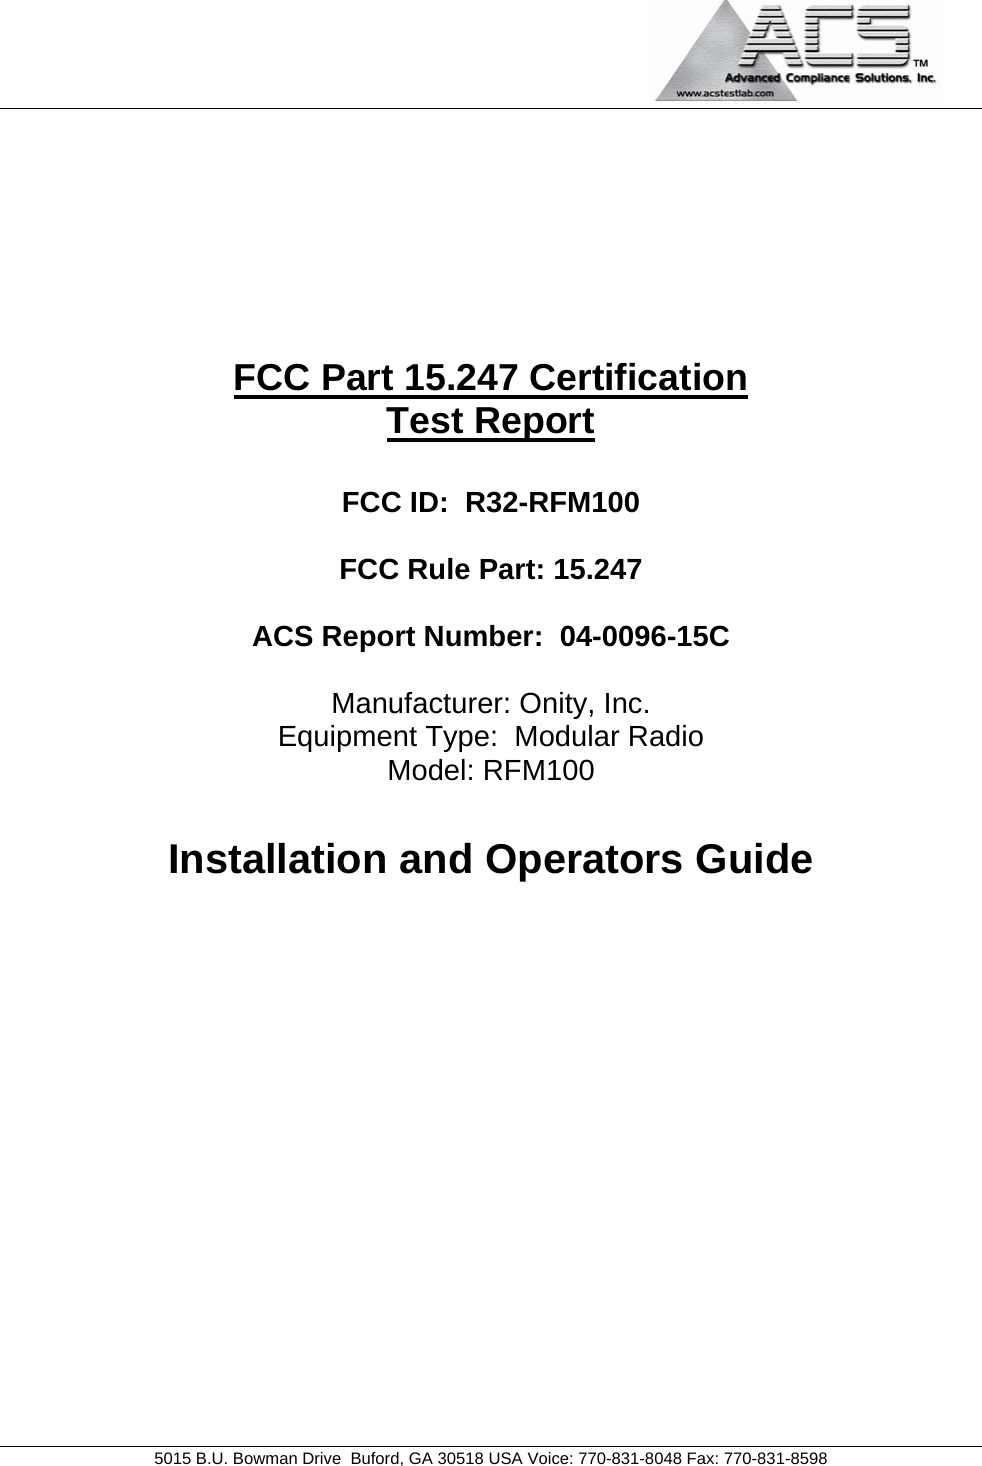                                             5015 B.U. Bowman Drive  Buford, GA 30518 USA Voice: 770-831-8048 Fax: 770-831-8598        FCC Part 15.247 Certification Test Report  FCC ID:  R32-RFM100  FCC Rule Part: 15.247  ACS Report Number:  04-0096-15C   Manufacturer: Onity, Inc. Equipment Type:  Modular Radio Model: RFM100  Installation and Operators Guide            